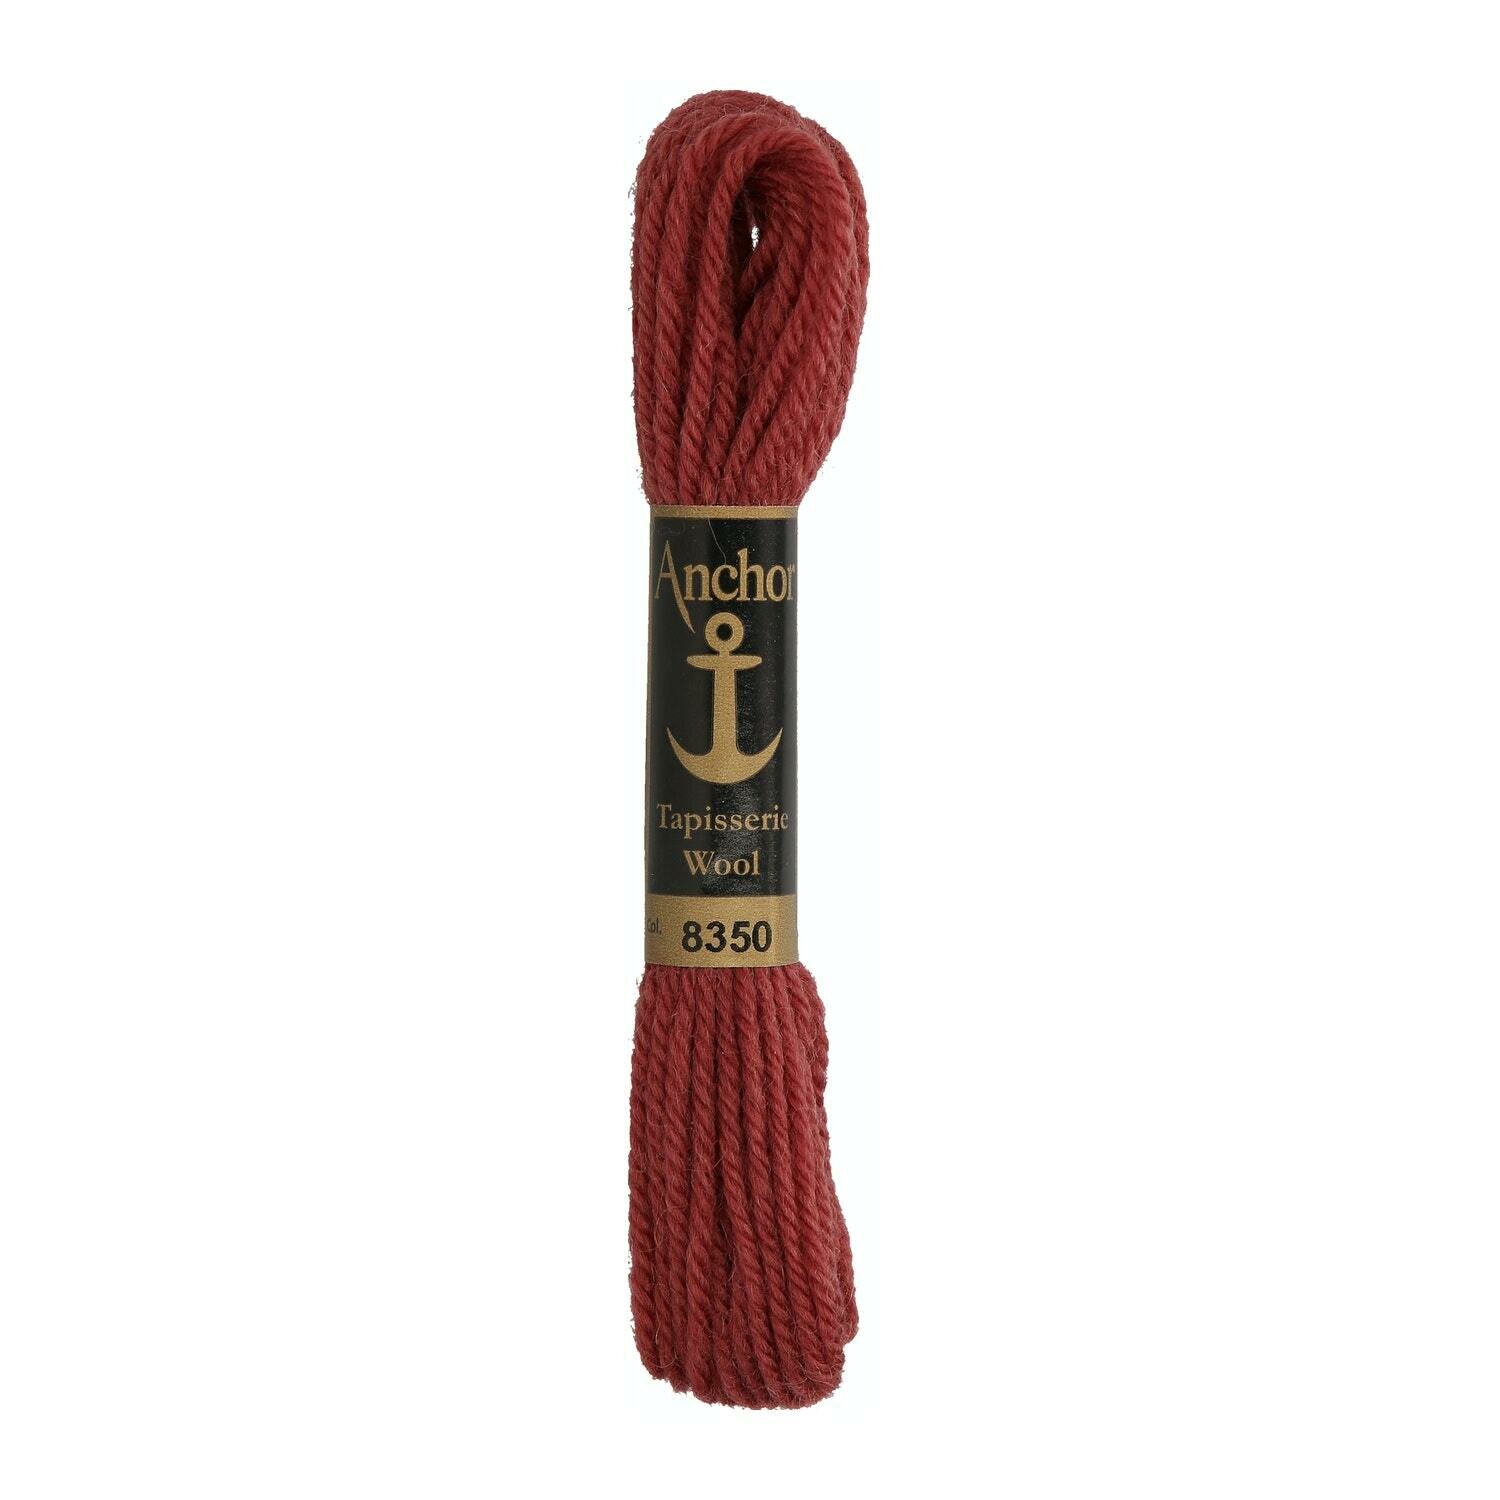 Anchor Tapisserie Wool #  08350